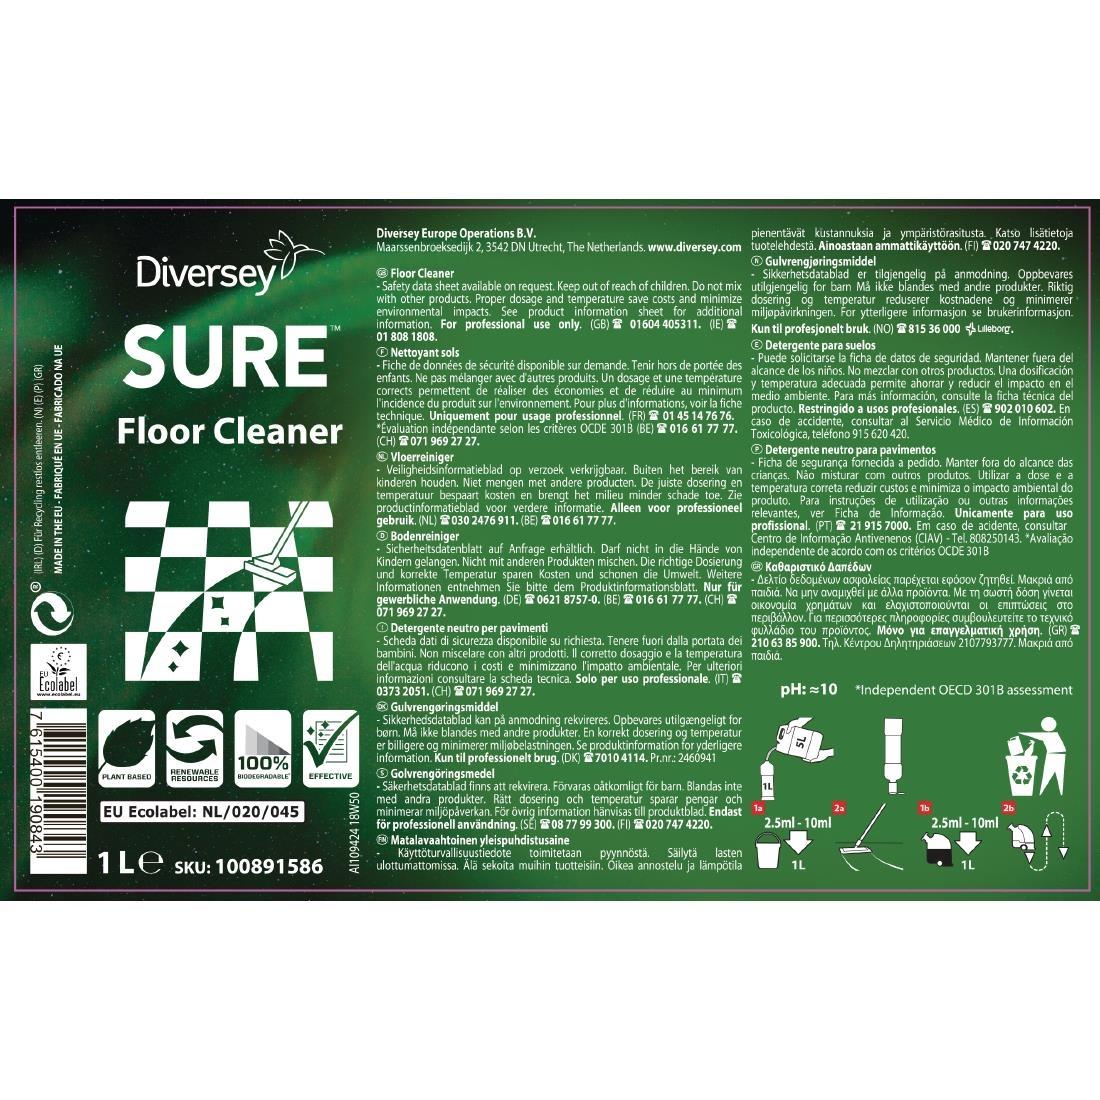 SURE Floor Cleaner Concentrate 1Ltr (6 Pack) - FA229  - 2